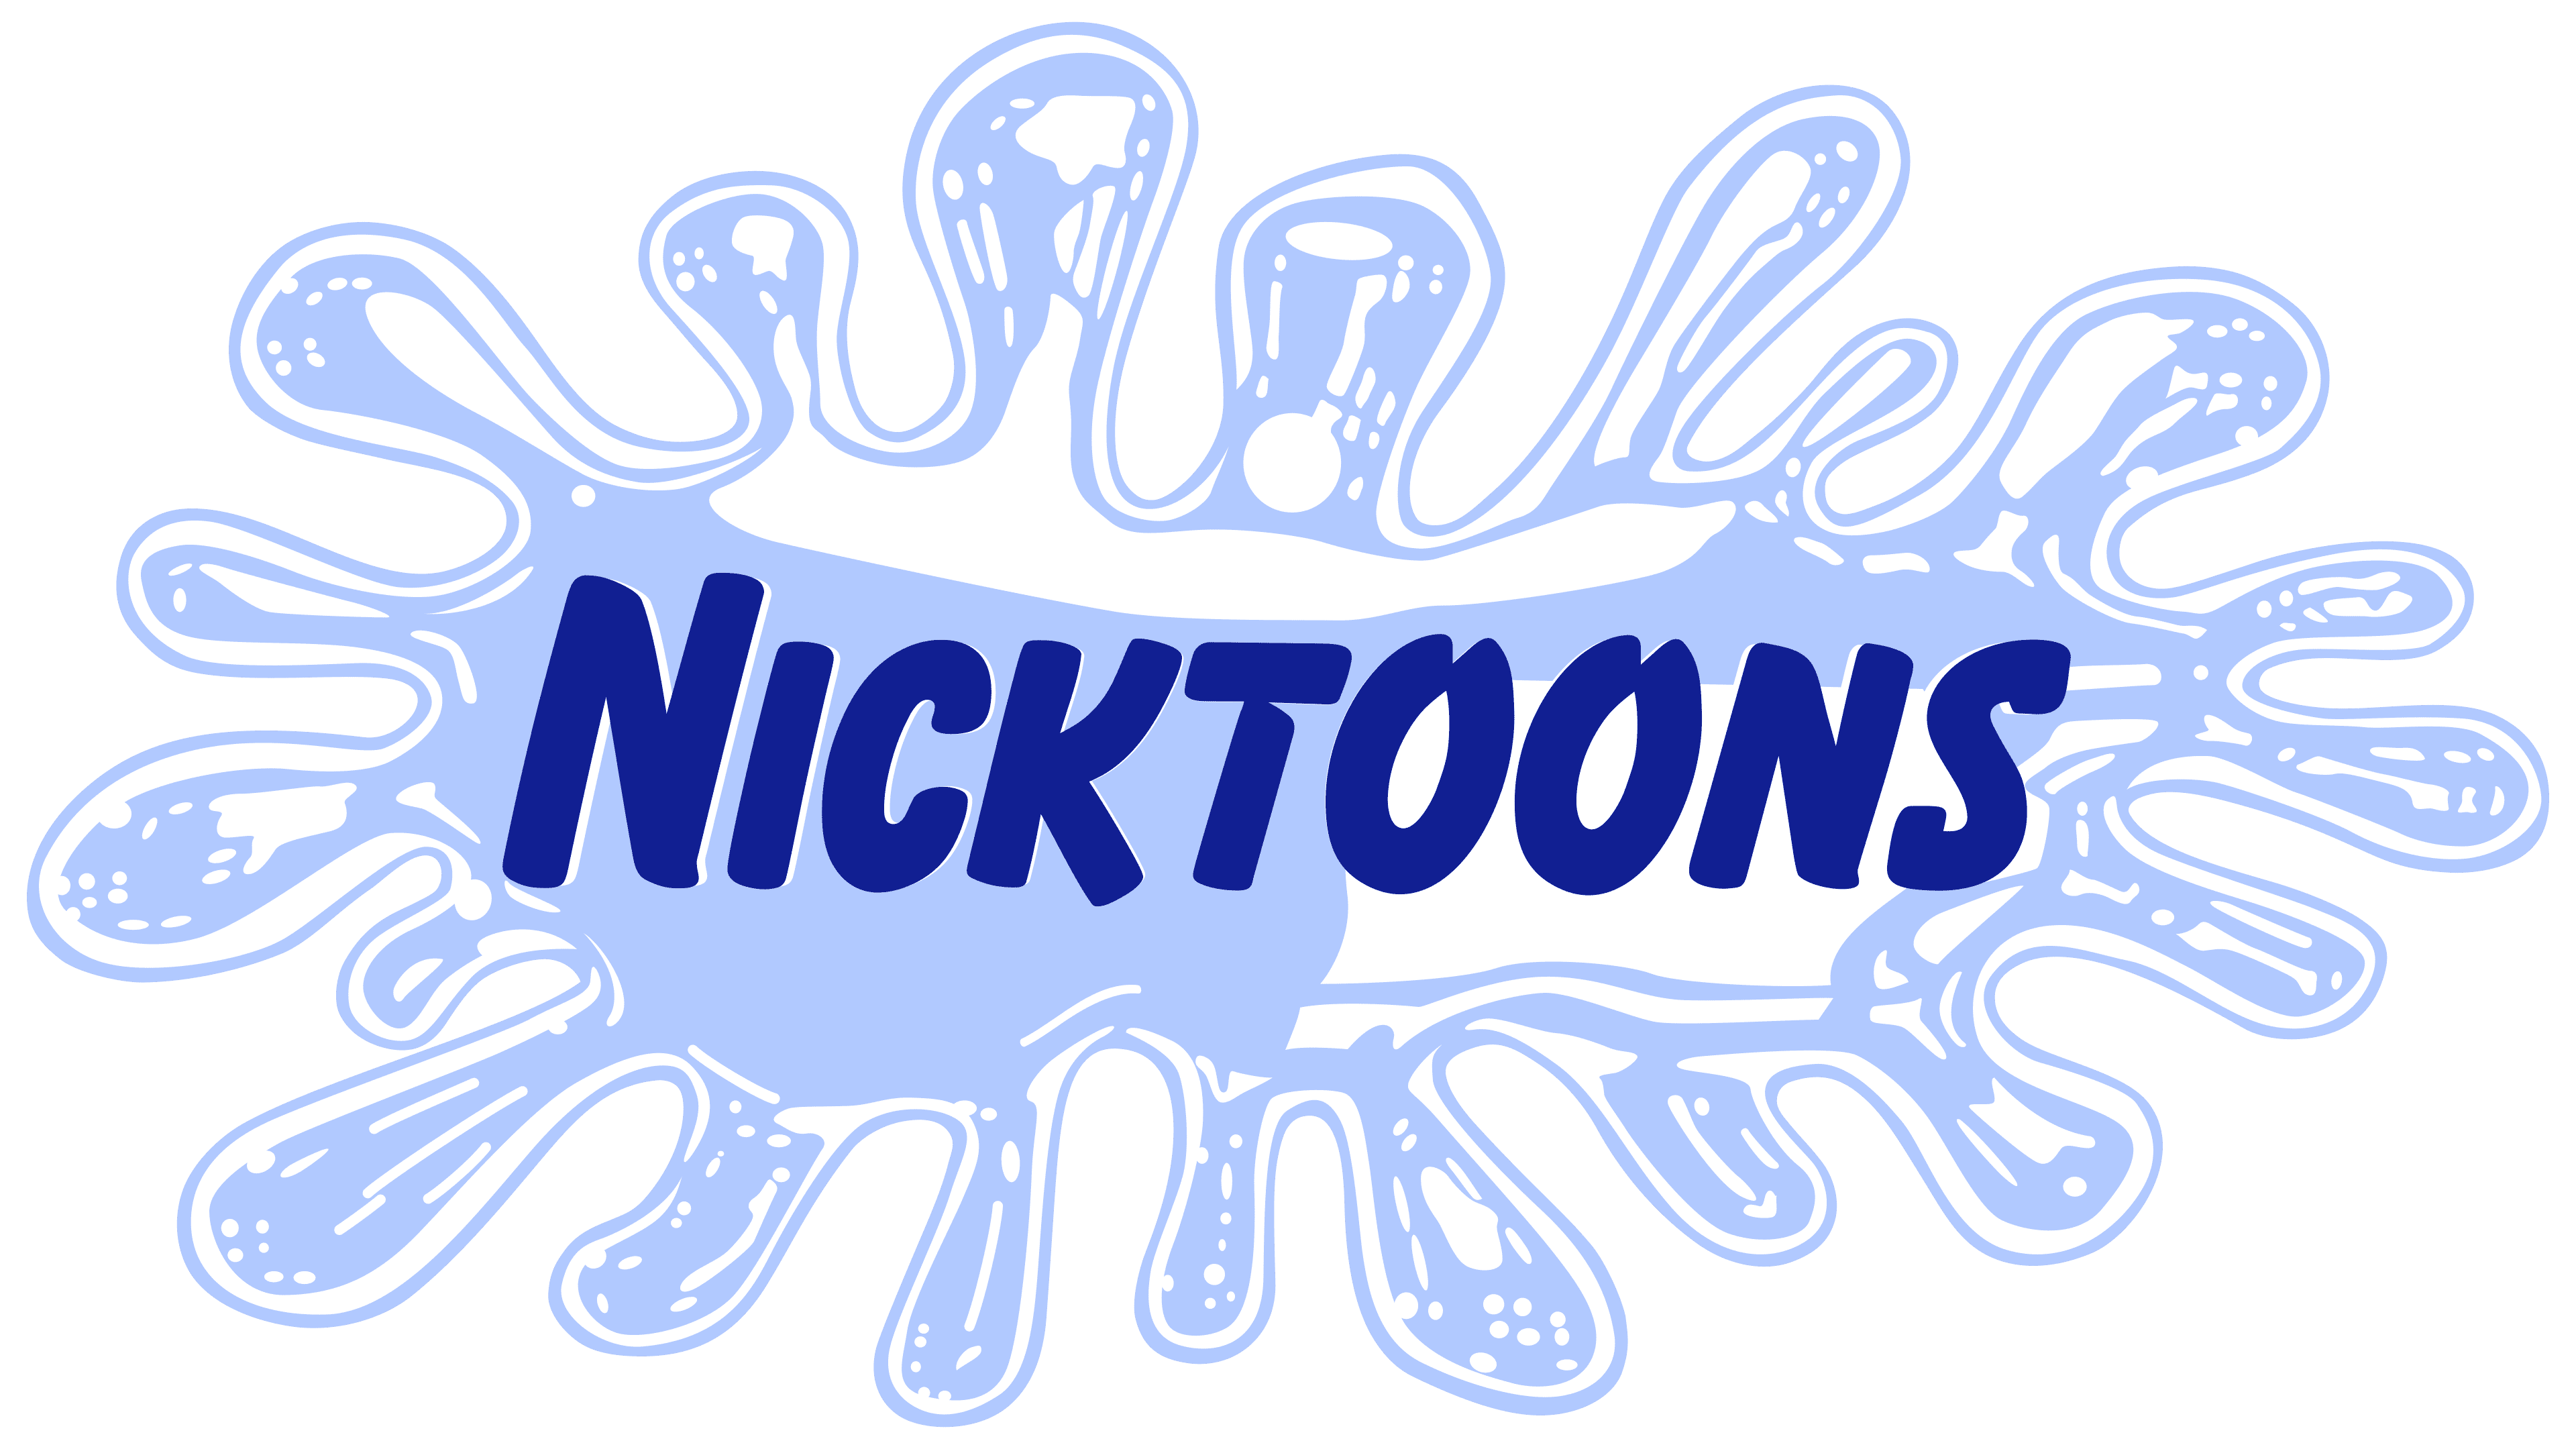 Nicktoons Logo, symbol, meaning, history, PNG, brand